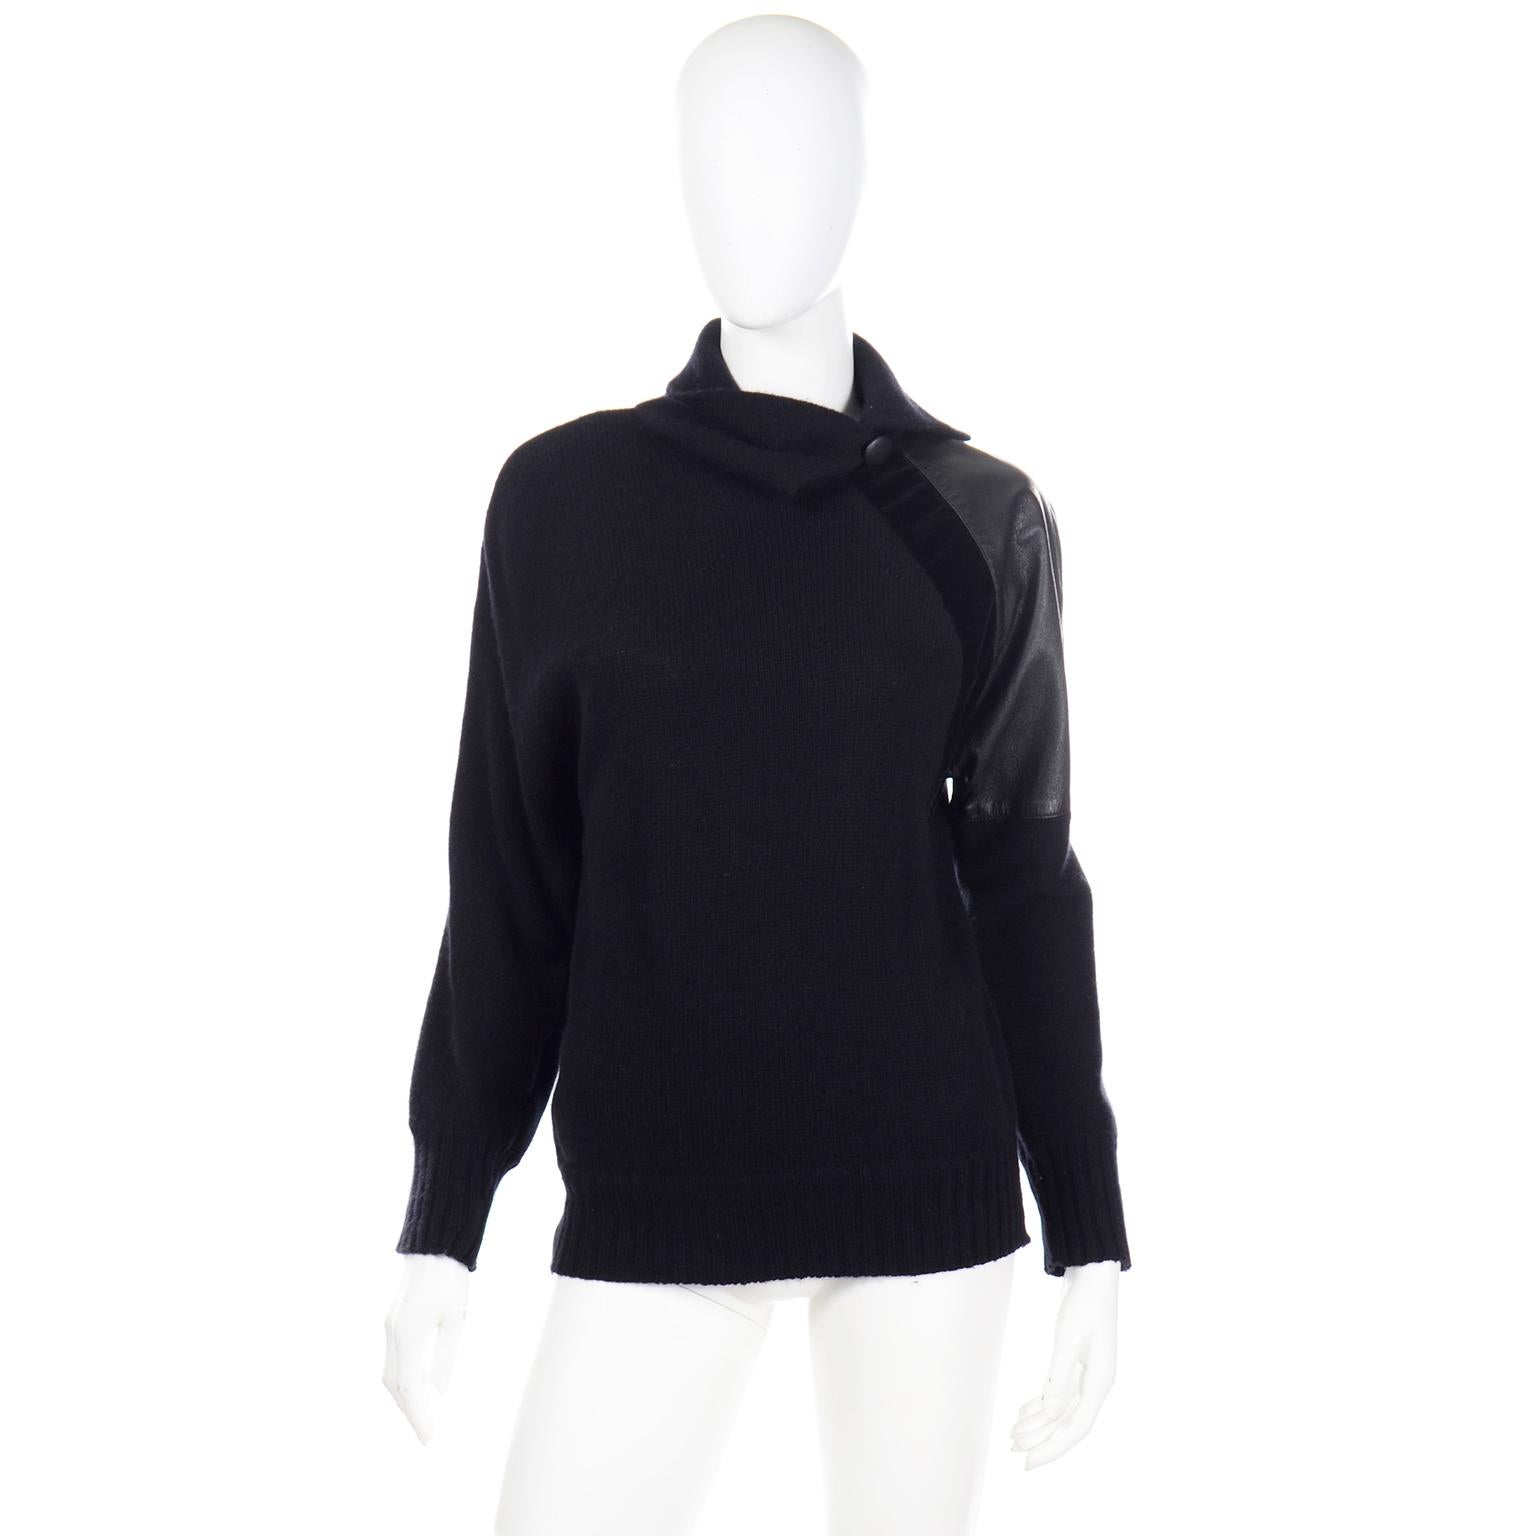 We love vintage Gianfranco Ferre and this fabulous black wool sweater top is a great example of his creativity. This seemingly simple sweater is just the opposite, with exceptional design details. The top has gorgeous black leather and black velvet